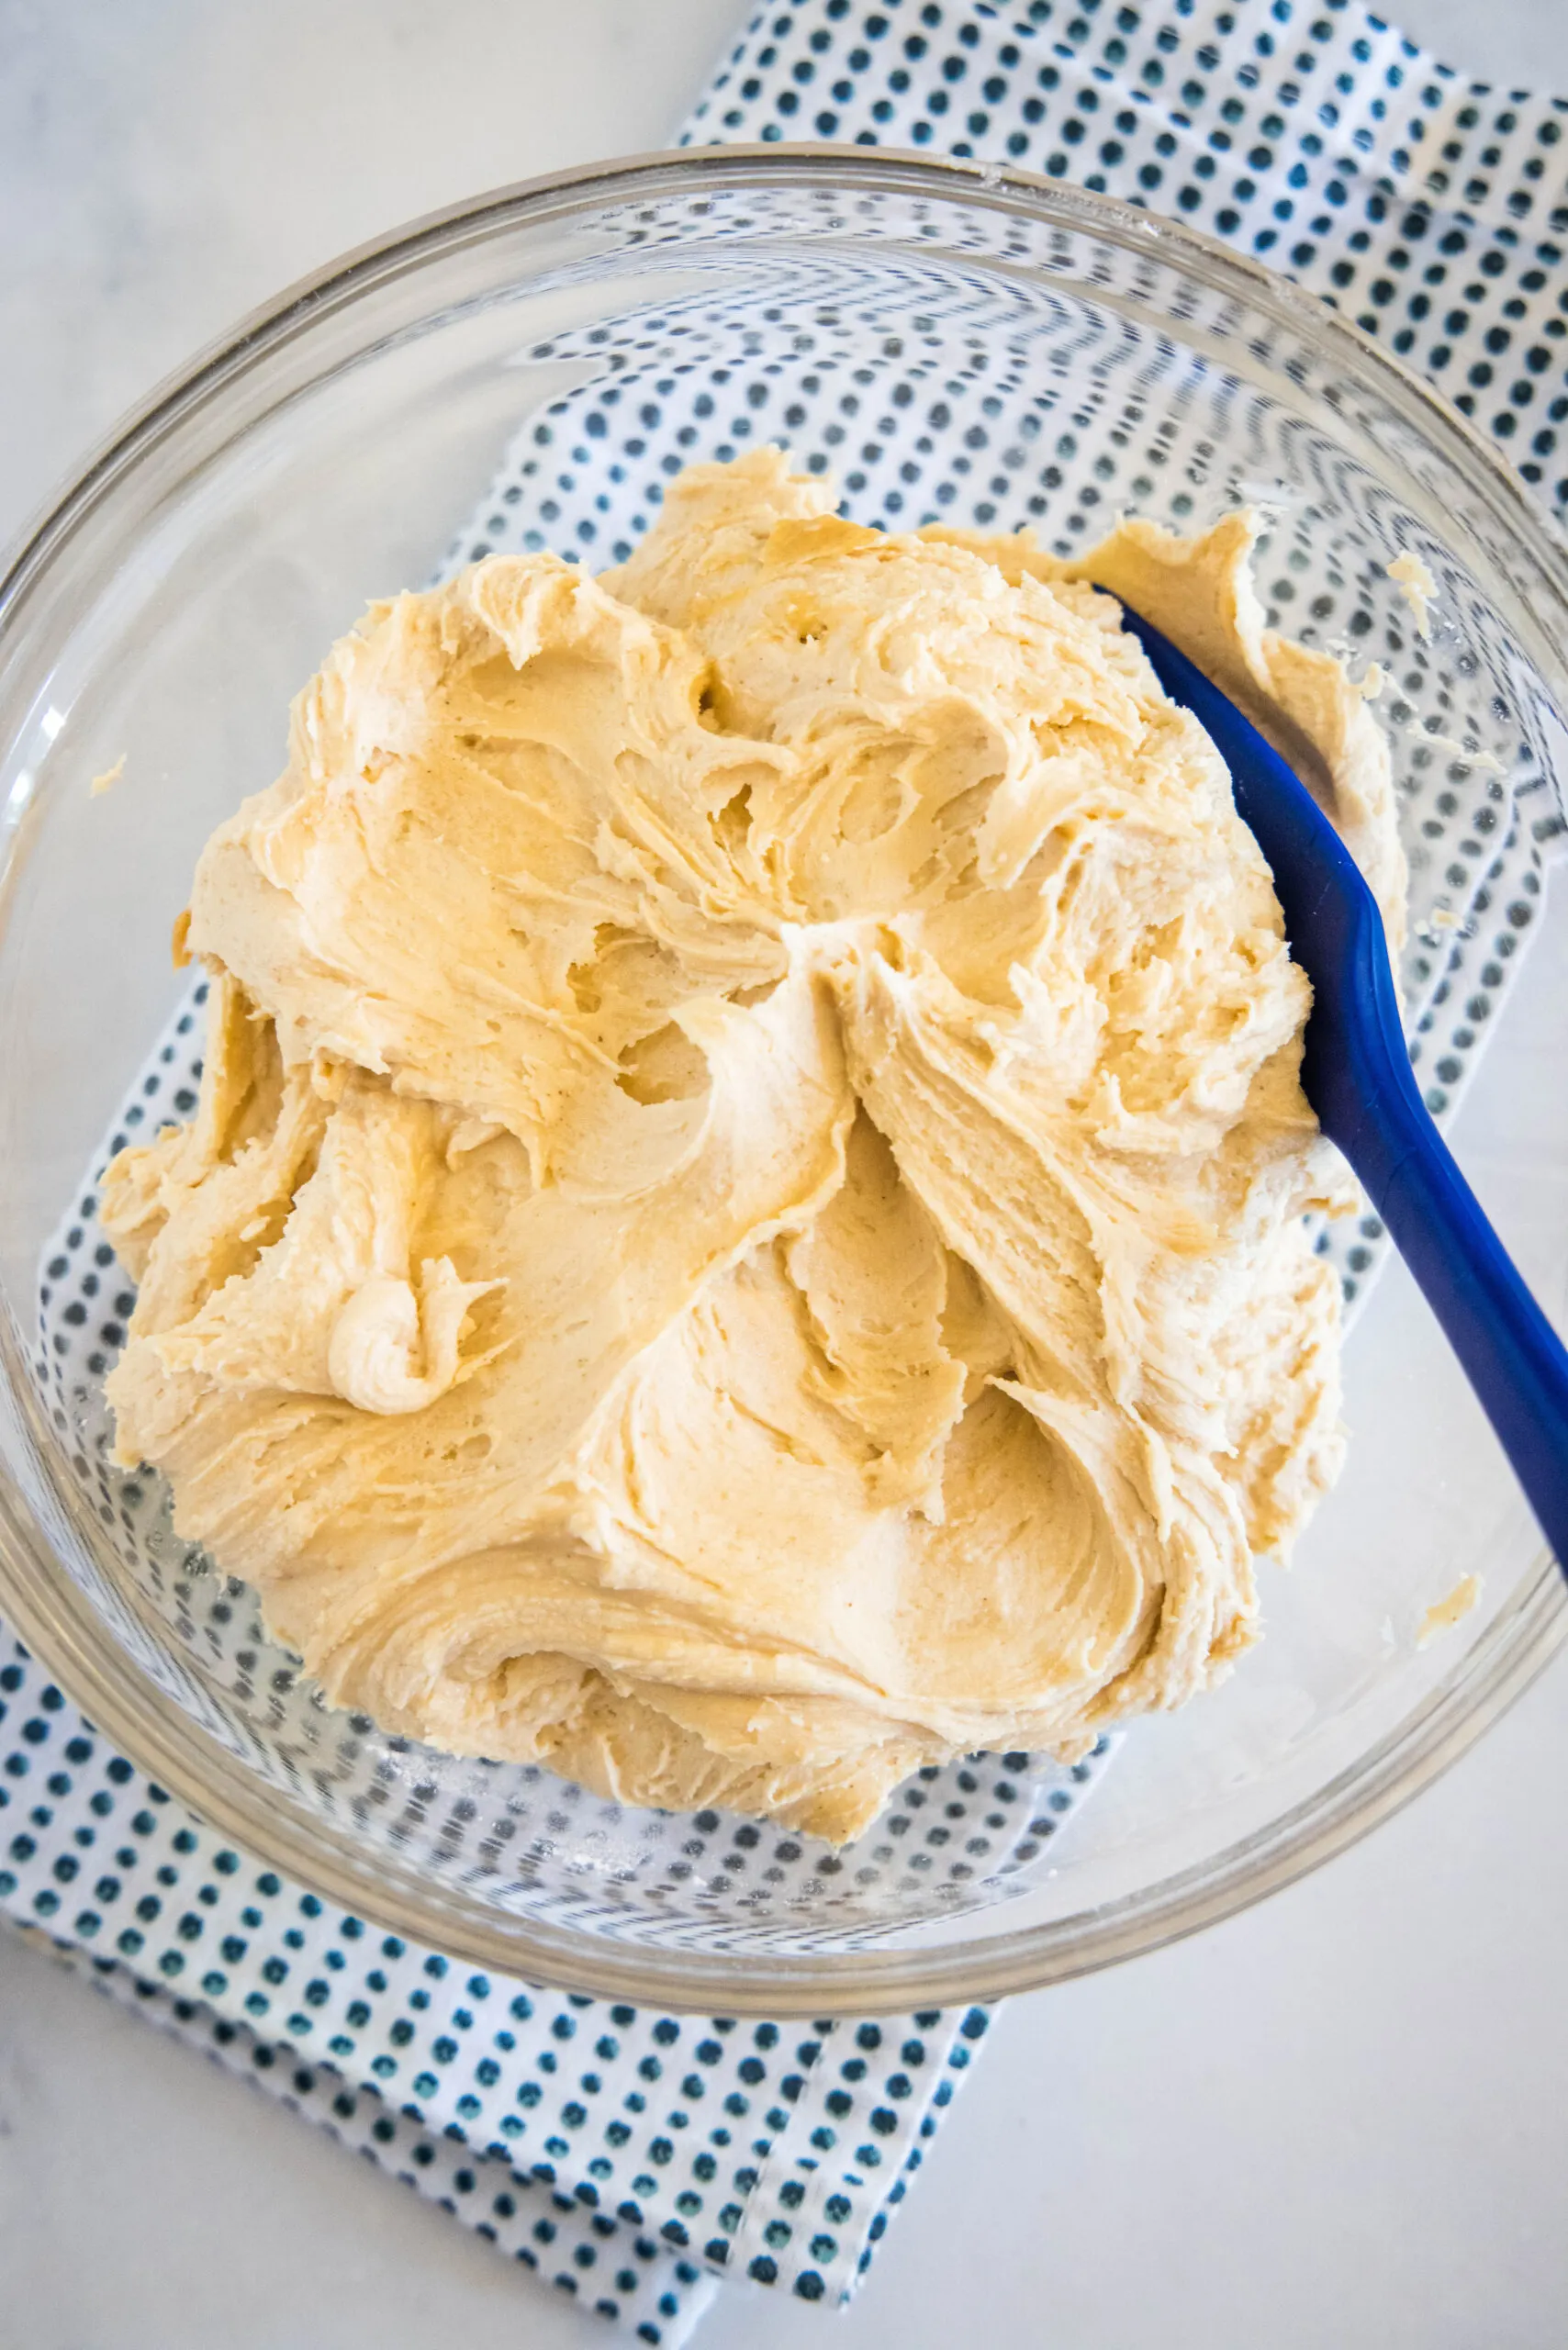 Overhead view of peanut butter frosting in a glass bowl with a blue stirring spoon.